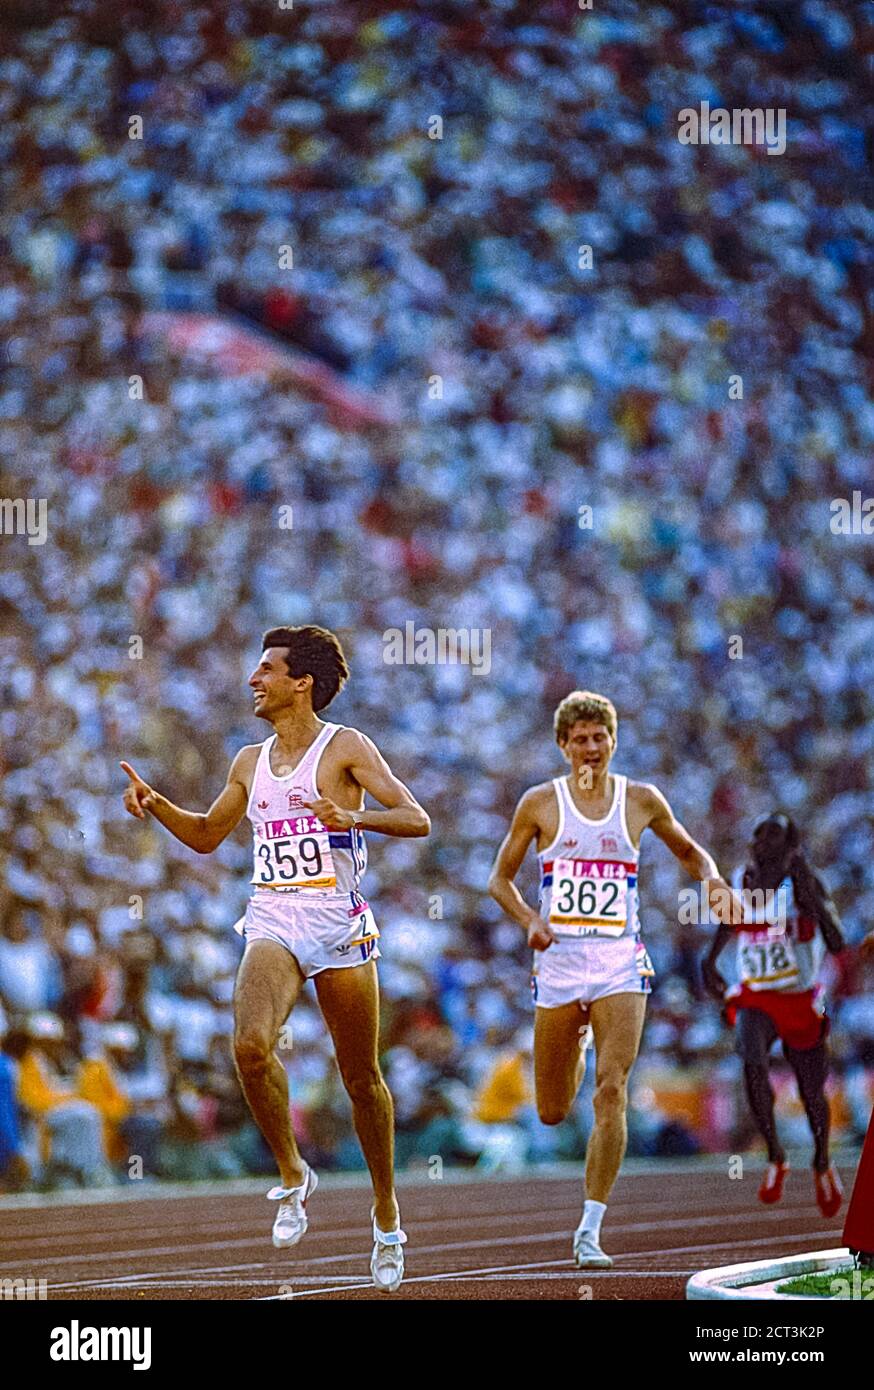 Seb Coe (GBR) winnig the 1500m defeating Steve Cram (GBR) for the gold medal at the 1984 Olympic Summer Games Olympic Stock Photo